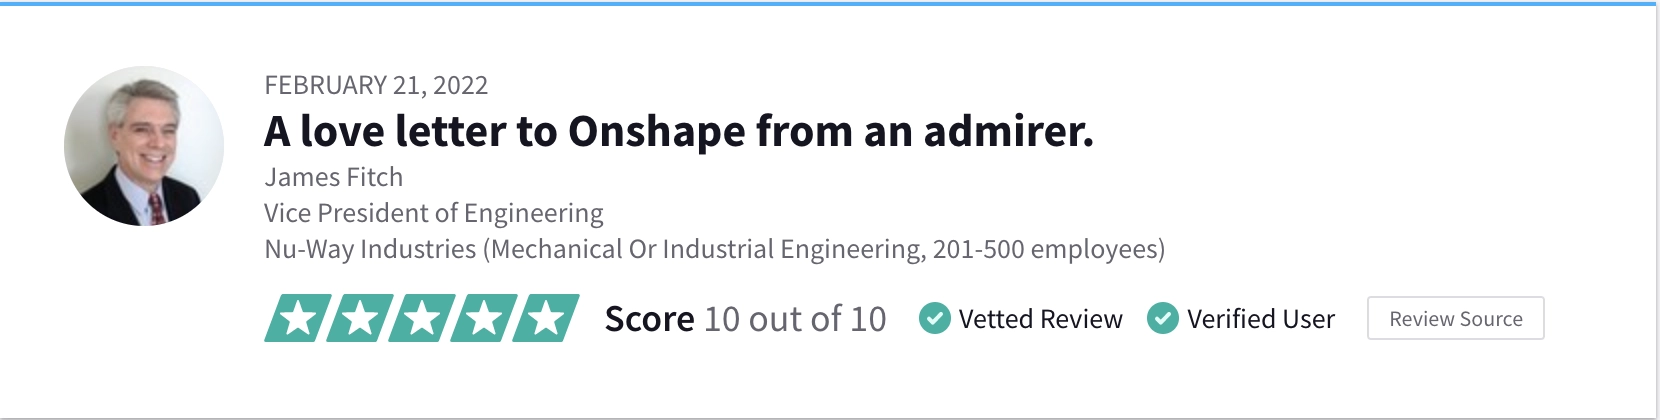 Onshape Review